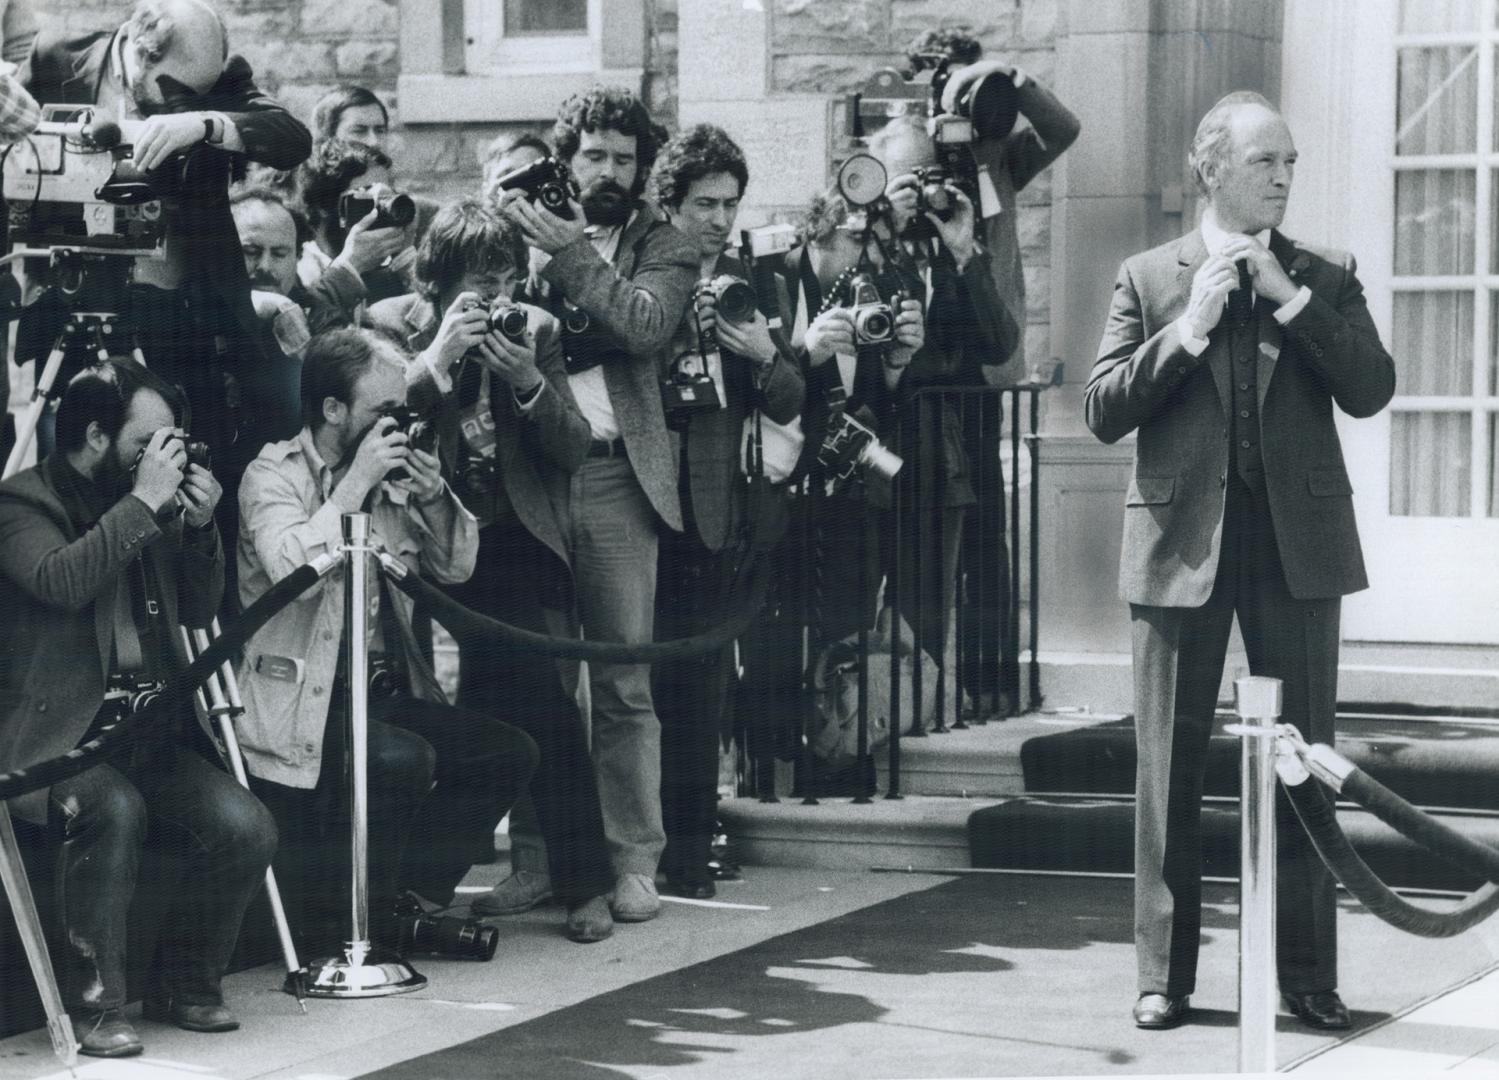 Dropping hints? Prime Minister Pierre Trudeau adjusts his tie outside 24 Sussex Dr., the official Ottawa residence of Canada's leader, just before goi(...)